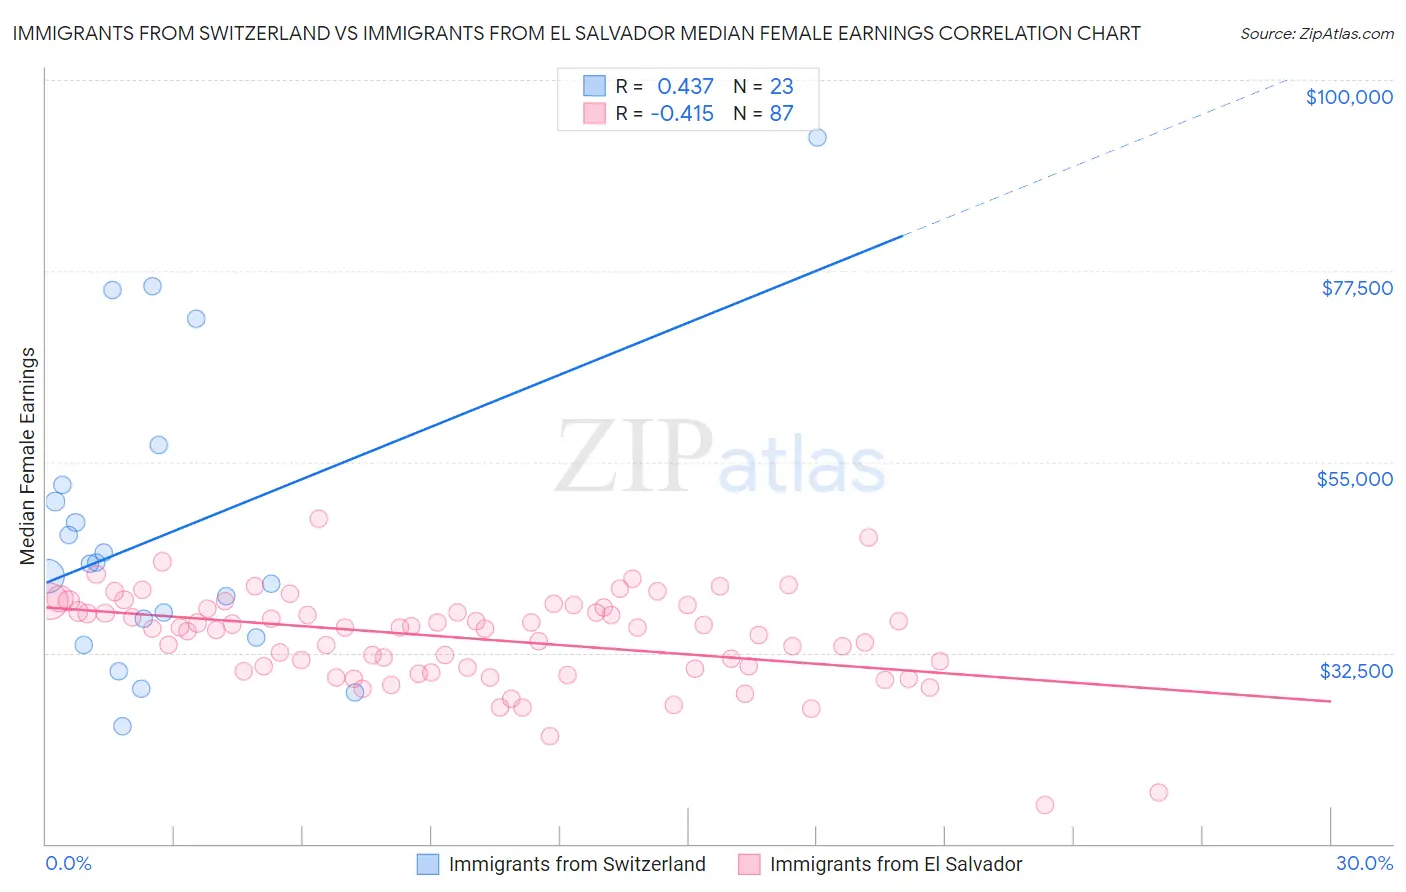 Immigrants from Switzerland vs Immigrants from El Salvador Median Female Earnings